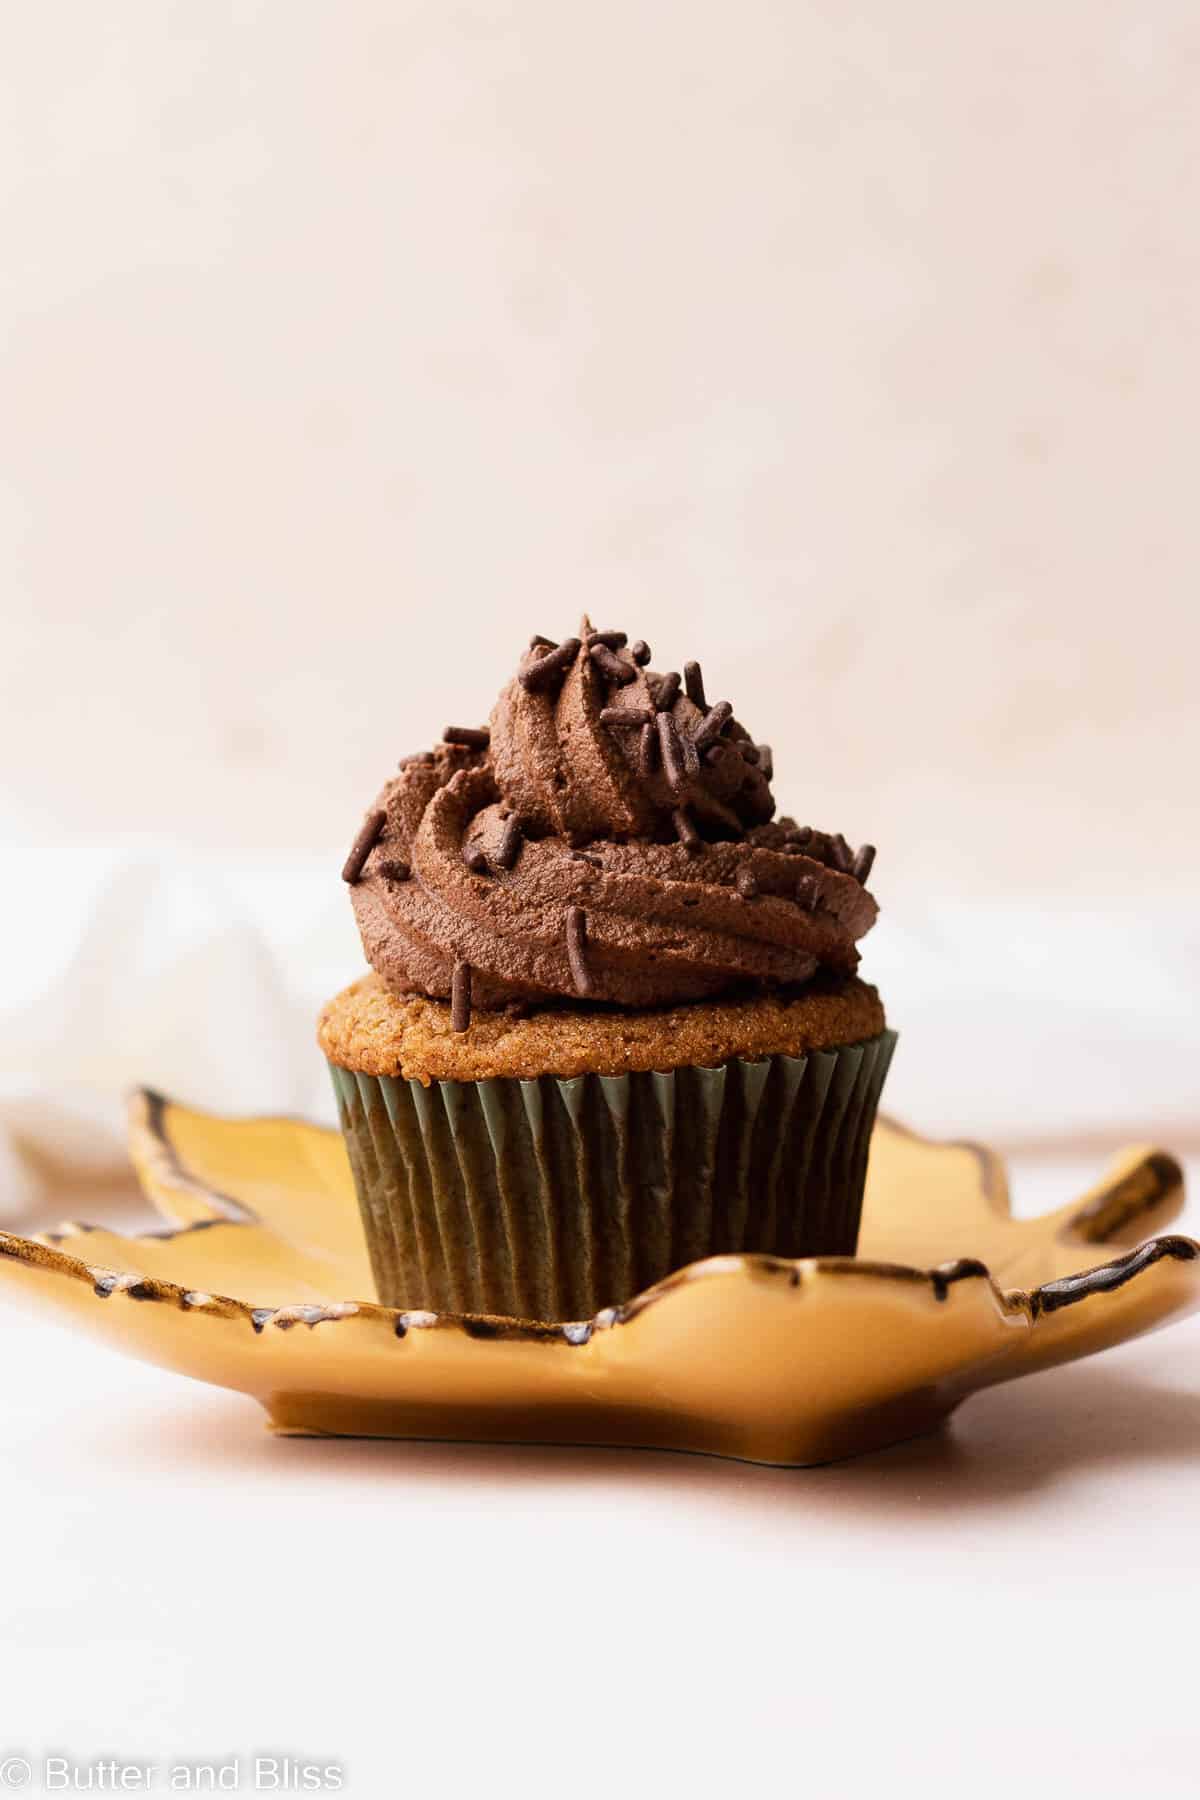 A single gluten free pumpkin cupcake with chocolate frosting on a fall plate.